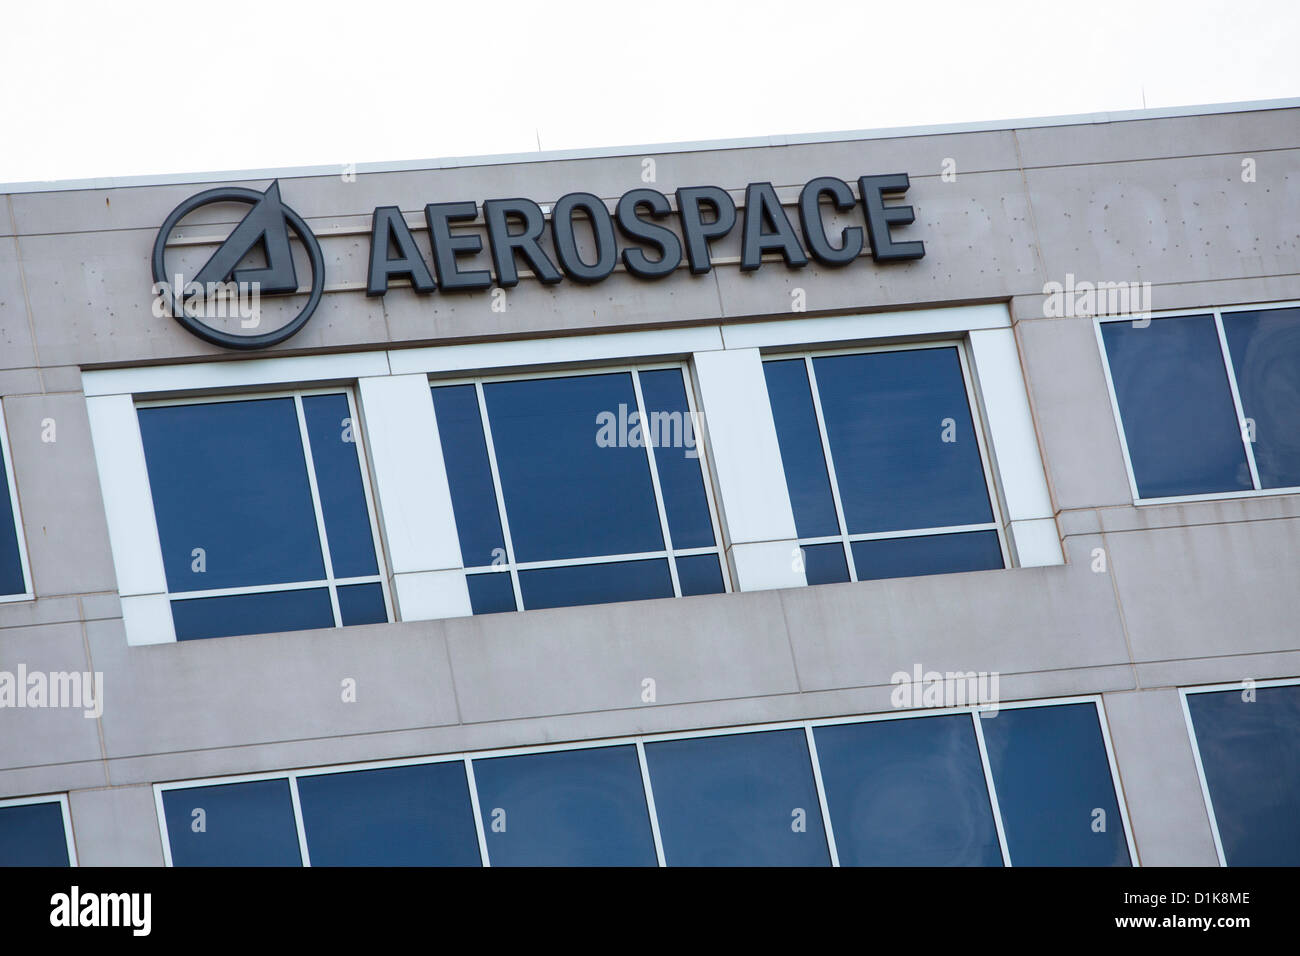 An office building occupied by defense contractor Aerospace.  Stock Photo